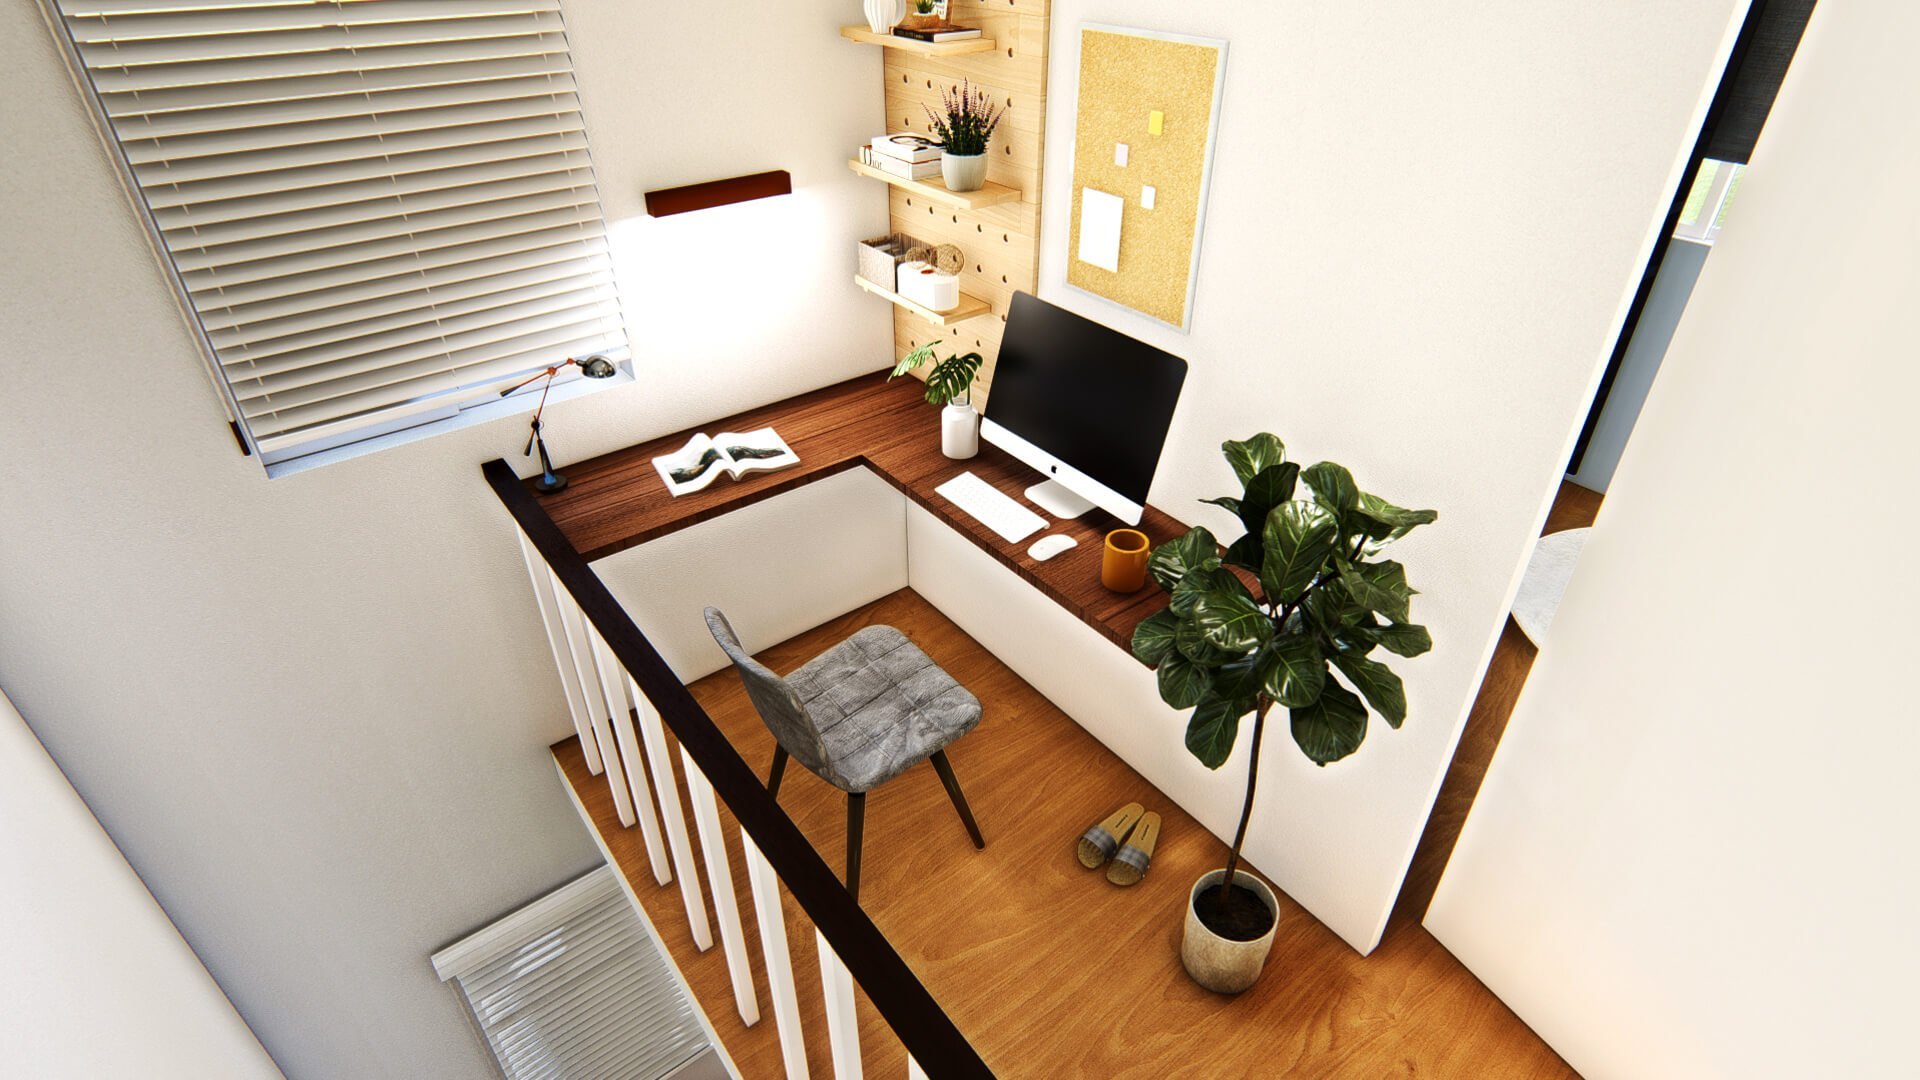 The HIVE – a designated space in Sienna house model for working area, study corner, or lounge.